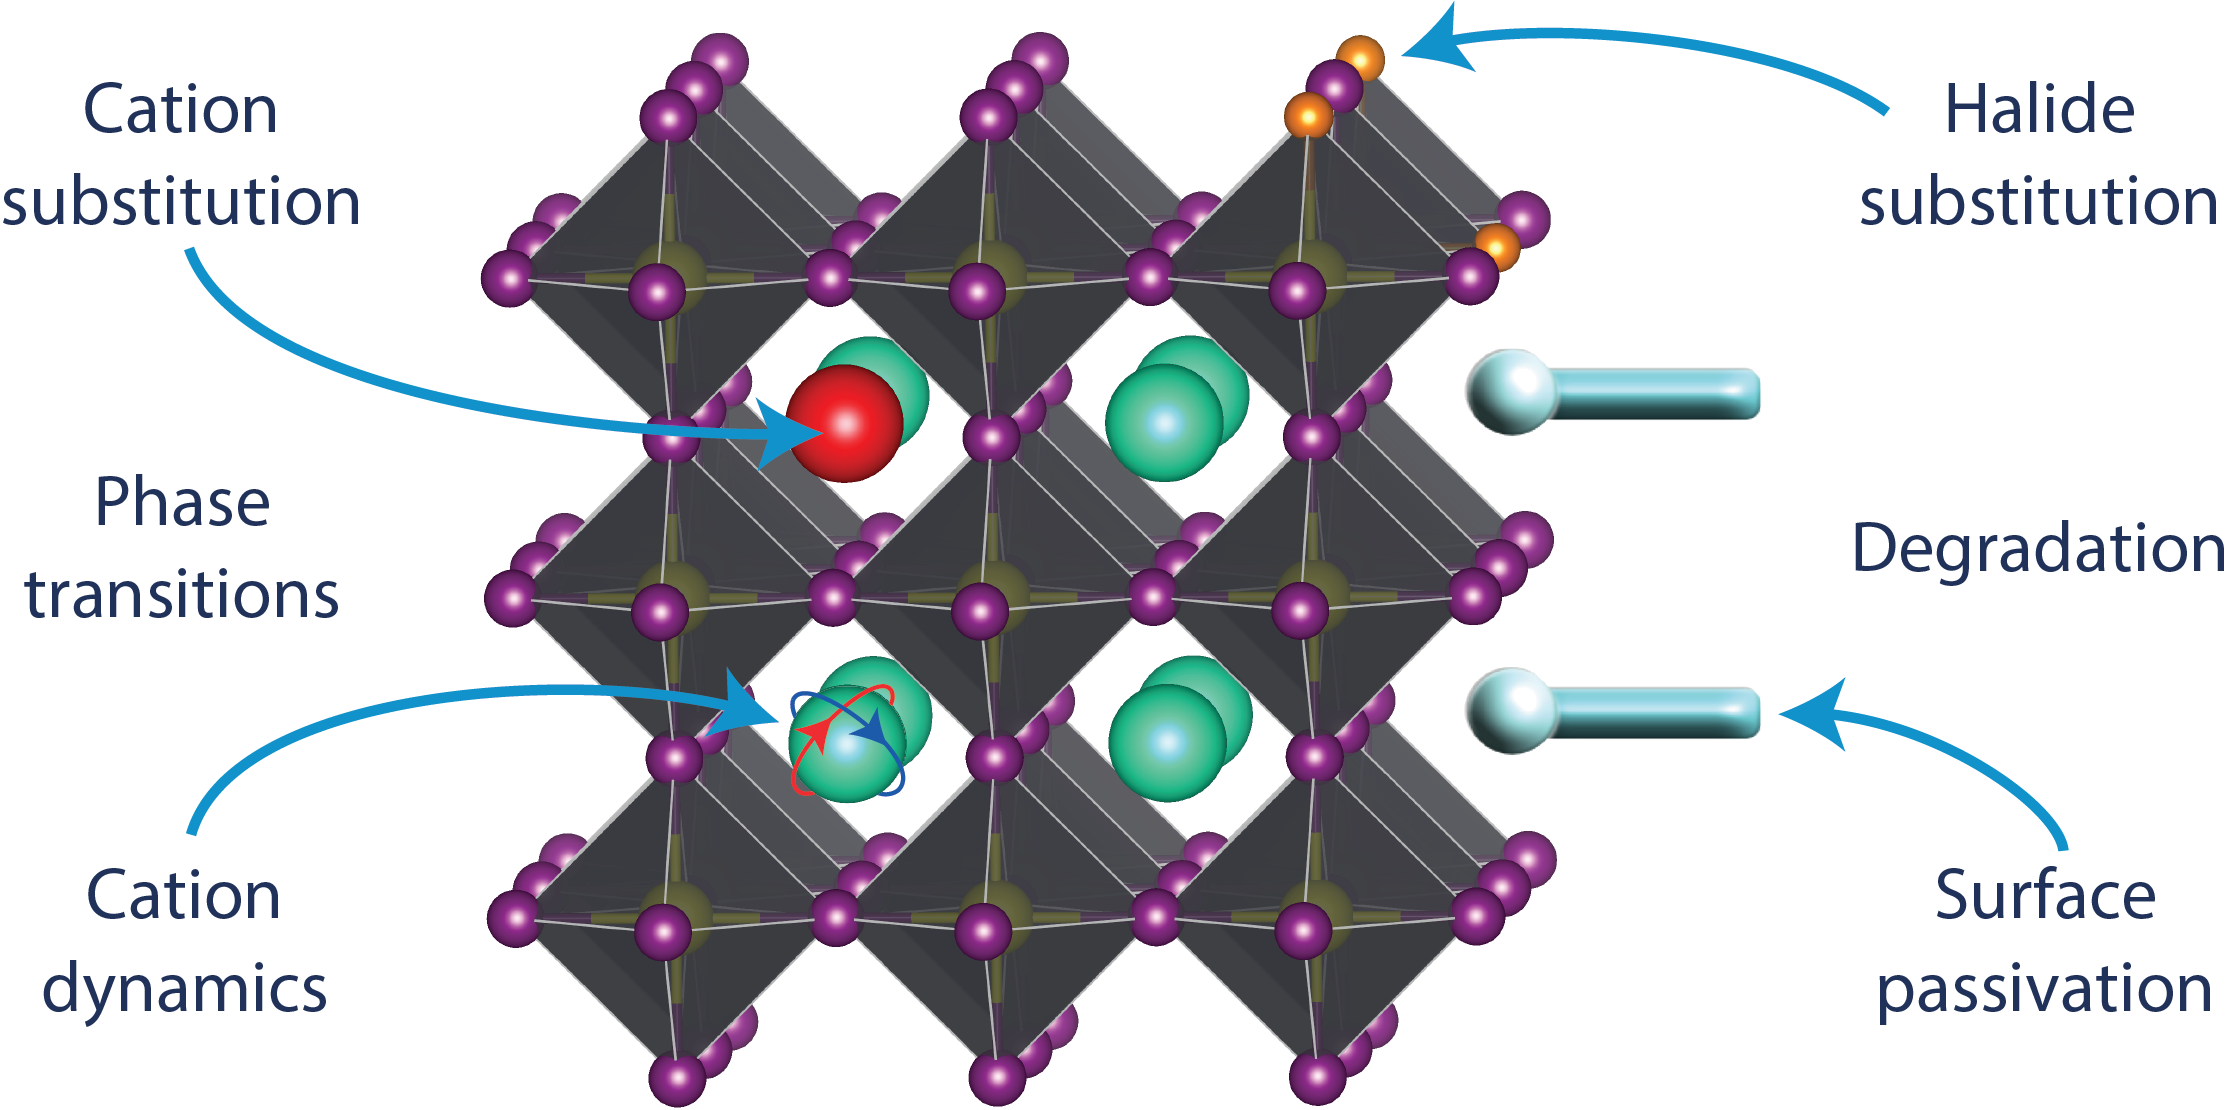 Schematic of the perovskite structure and different aspects that can be studied